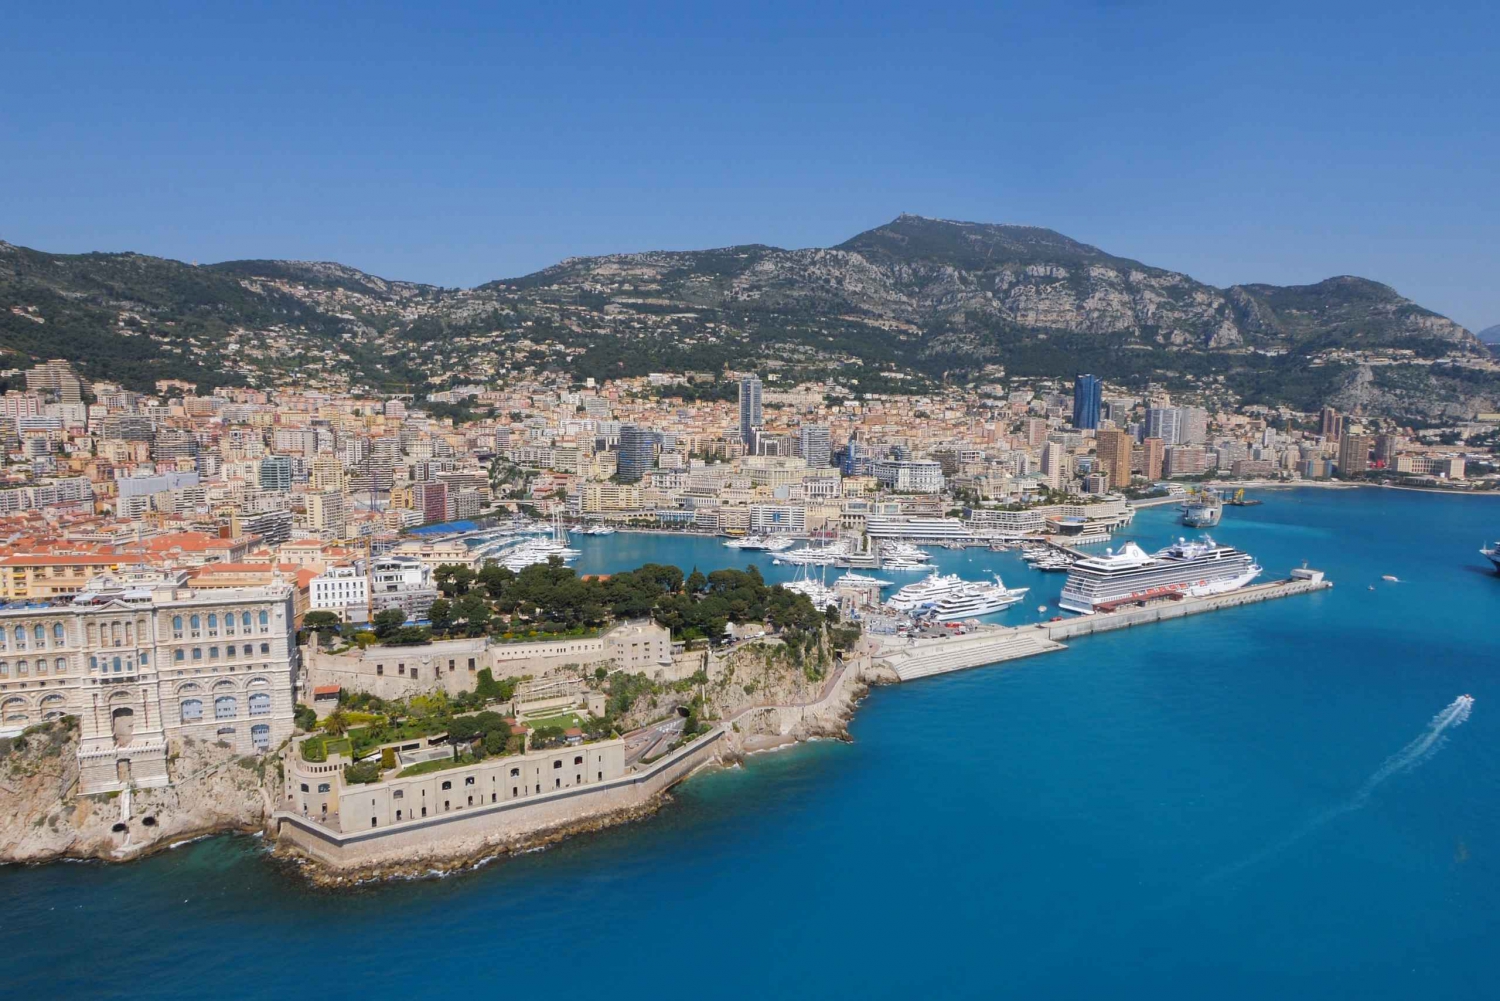 Full-Day Small Group Tour to Monaco and Eze